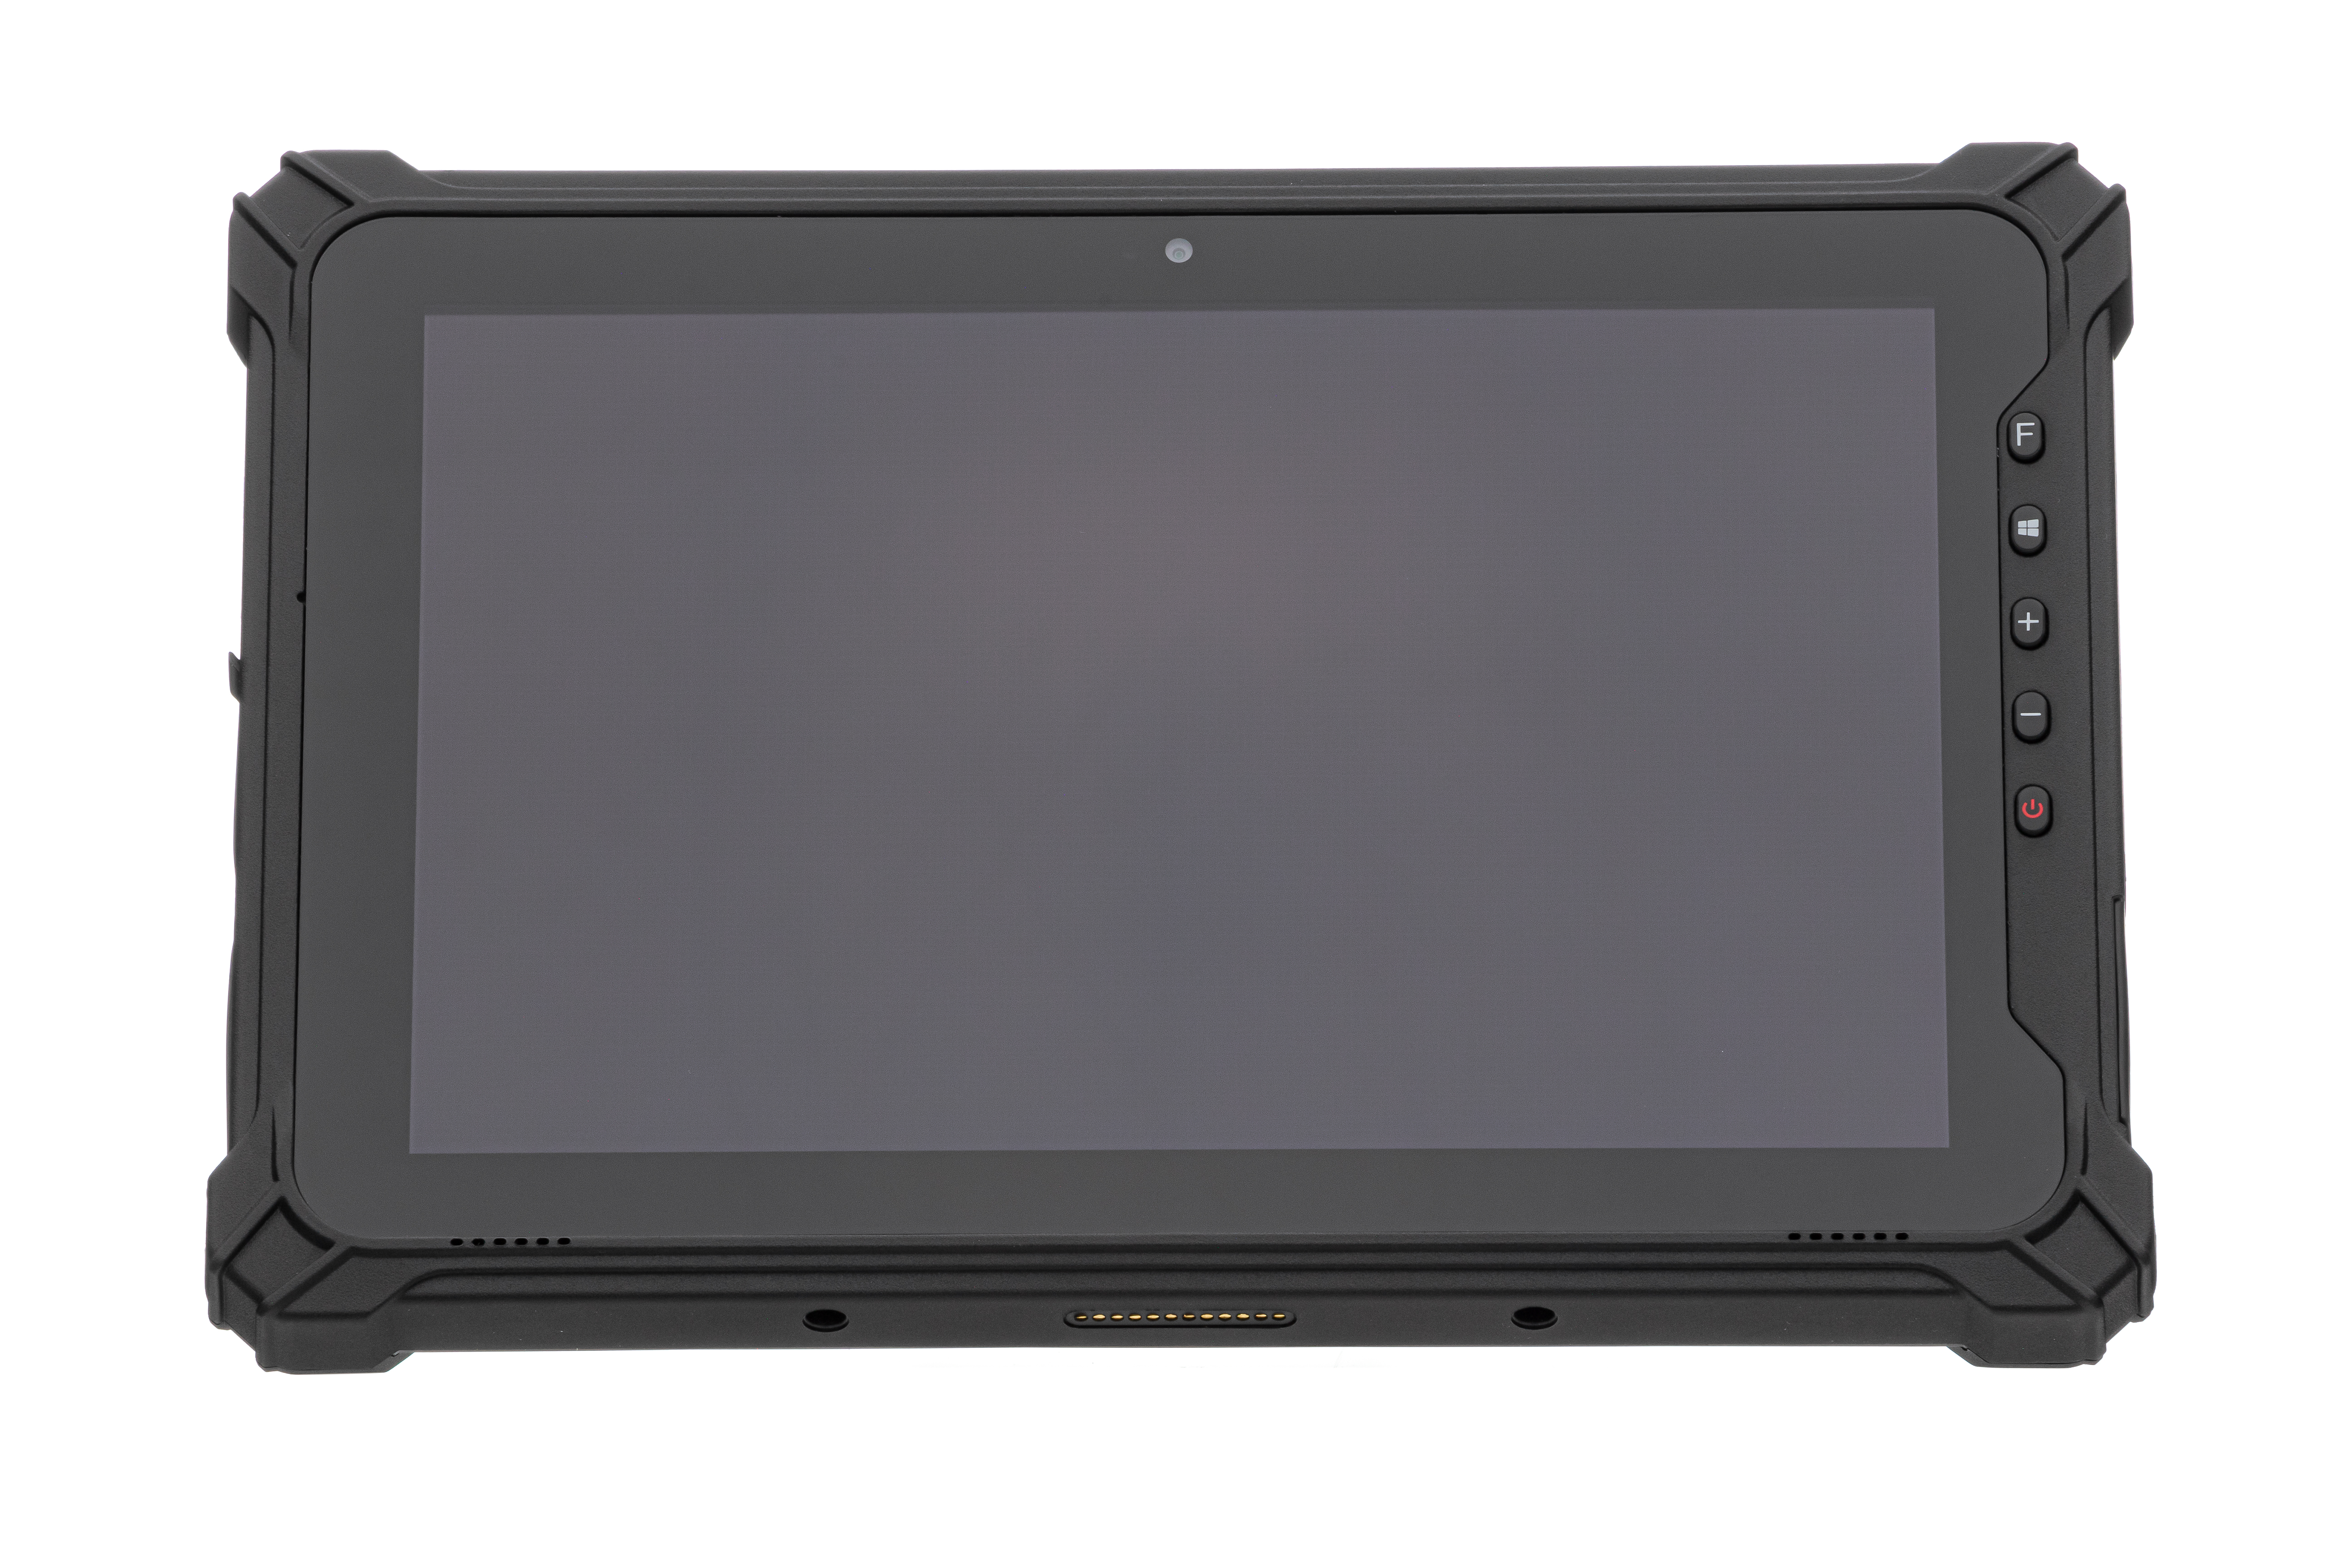 NEW: RUGGED TAB 10 – Robust industrial tablet 